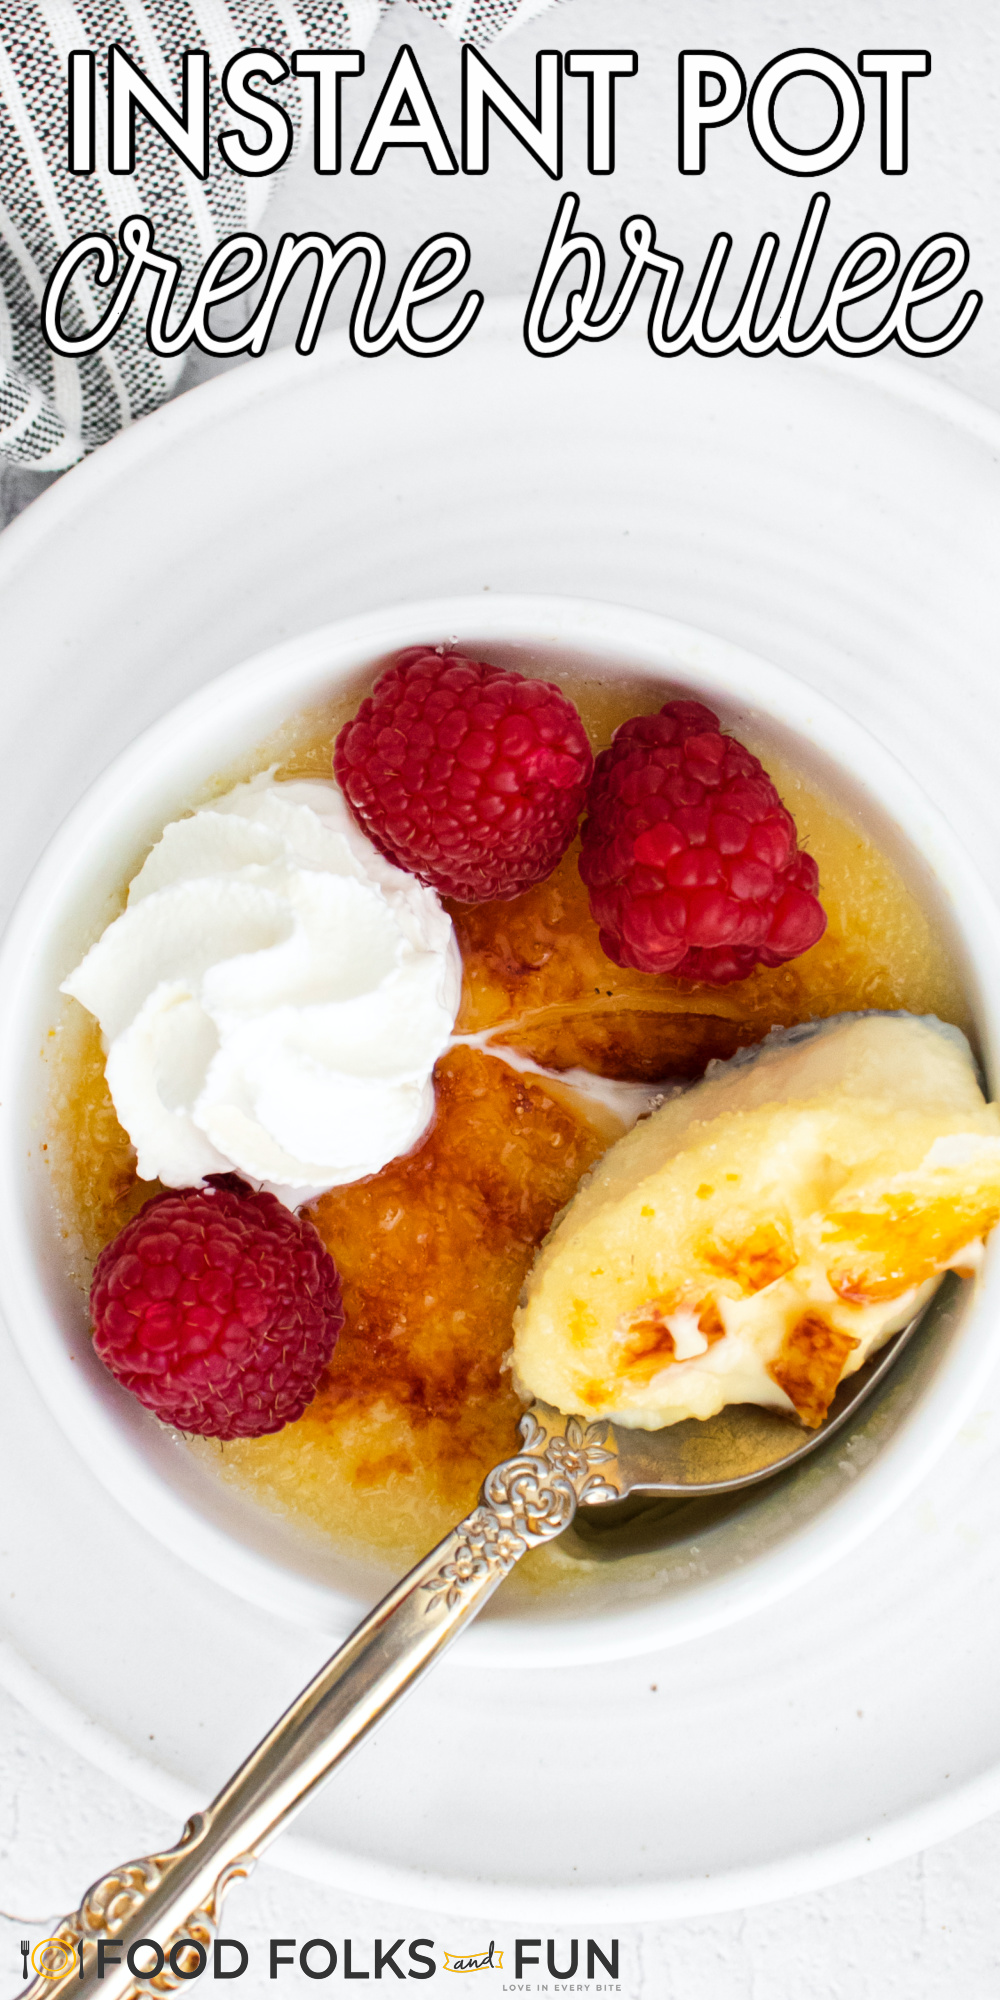 Classic, simple, silky, and luscious Creme Brulee couldn’t be any easier with this Instant Pot Creme Brulee recipe.  via @foodfolksandfun